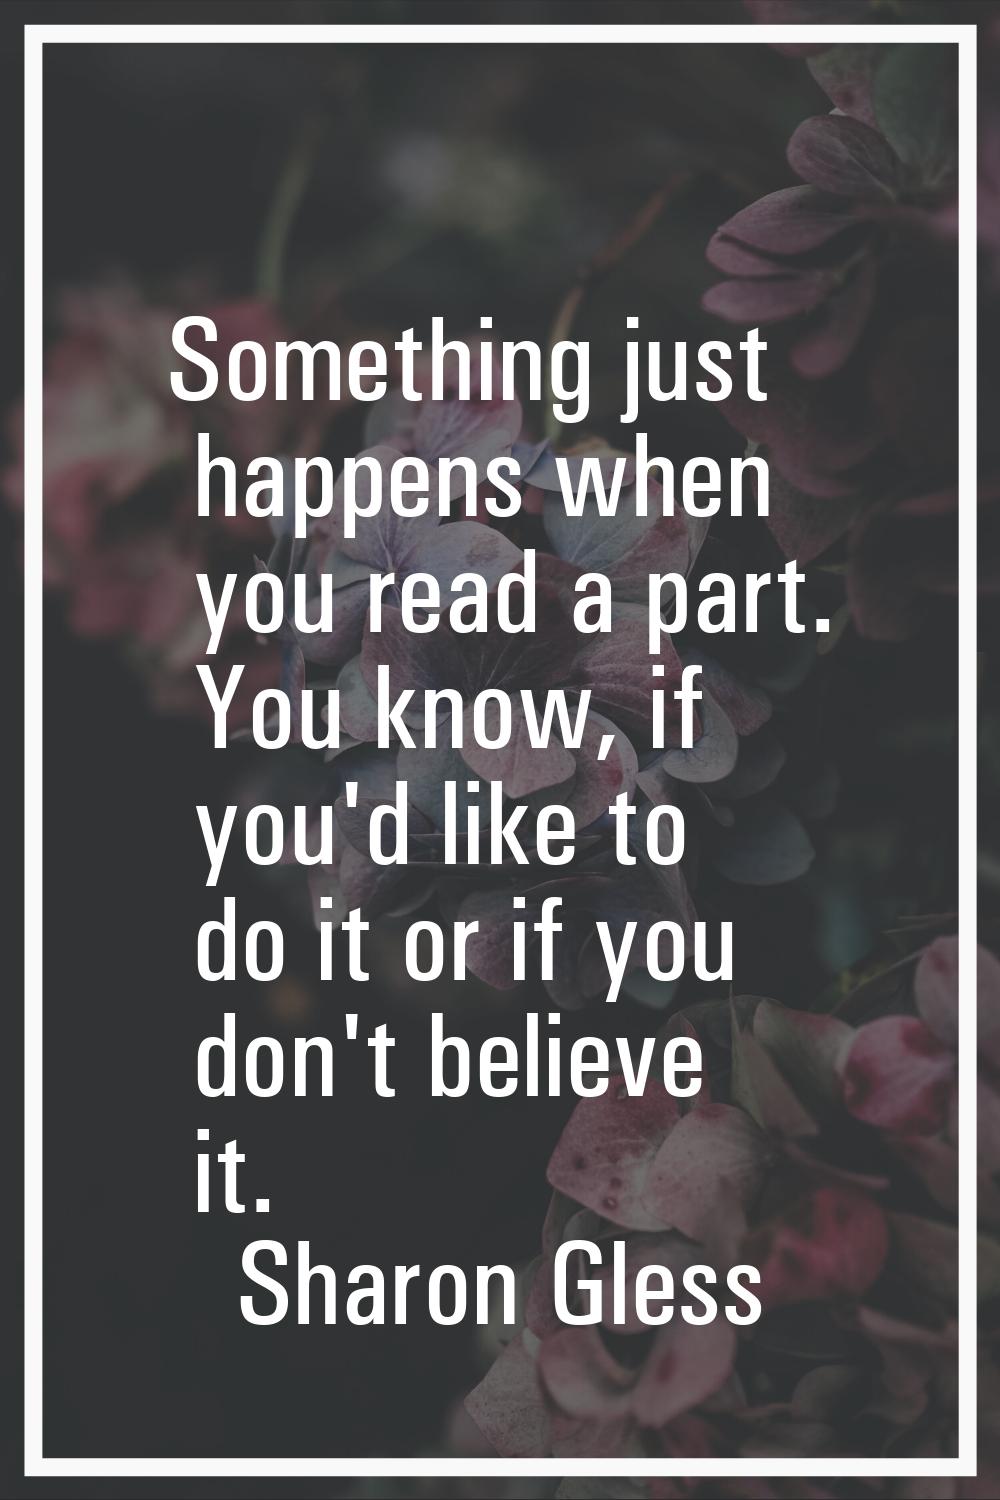 Something just happens when you read a part. You know, if you'd like to do it or if you don't belie